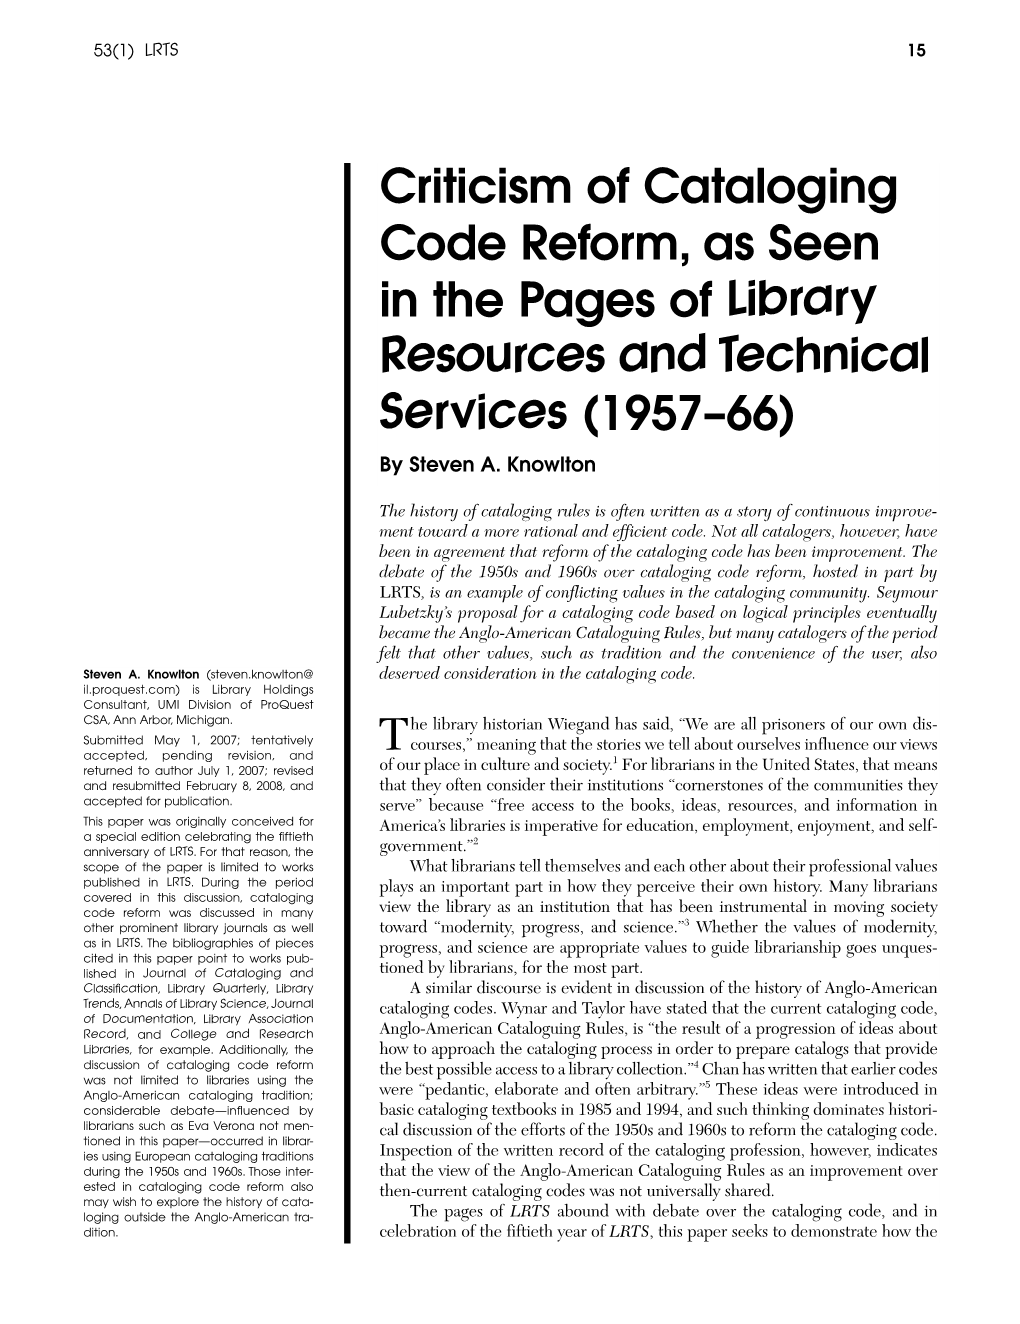 Criticism of Cataloging Code Reform, As Seen in the Pages of Library Resources and Technical Services (1957–66) by Steven A